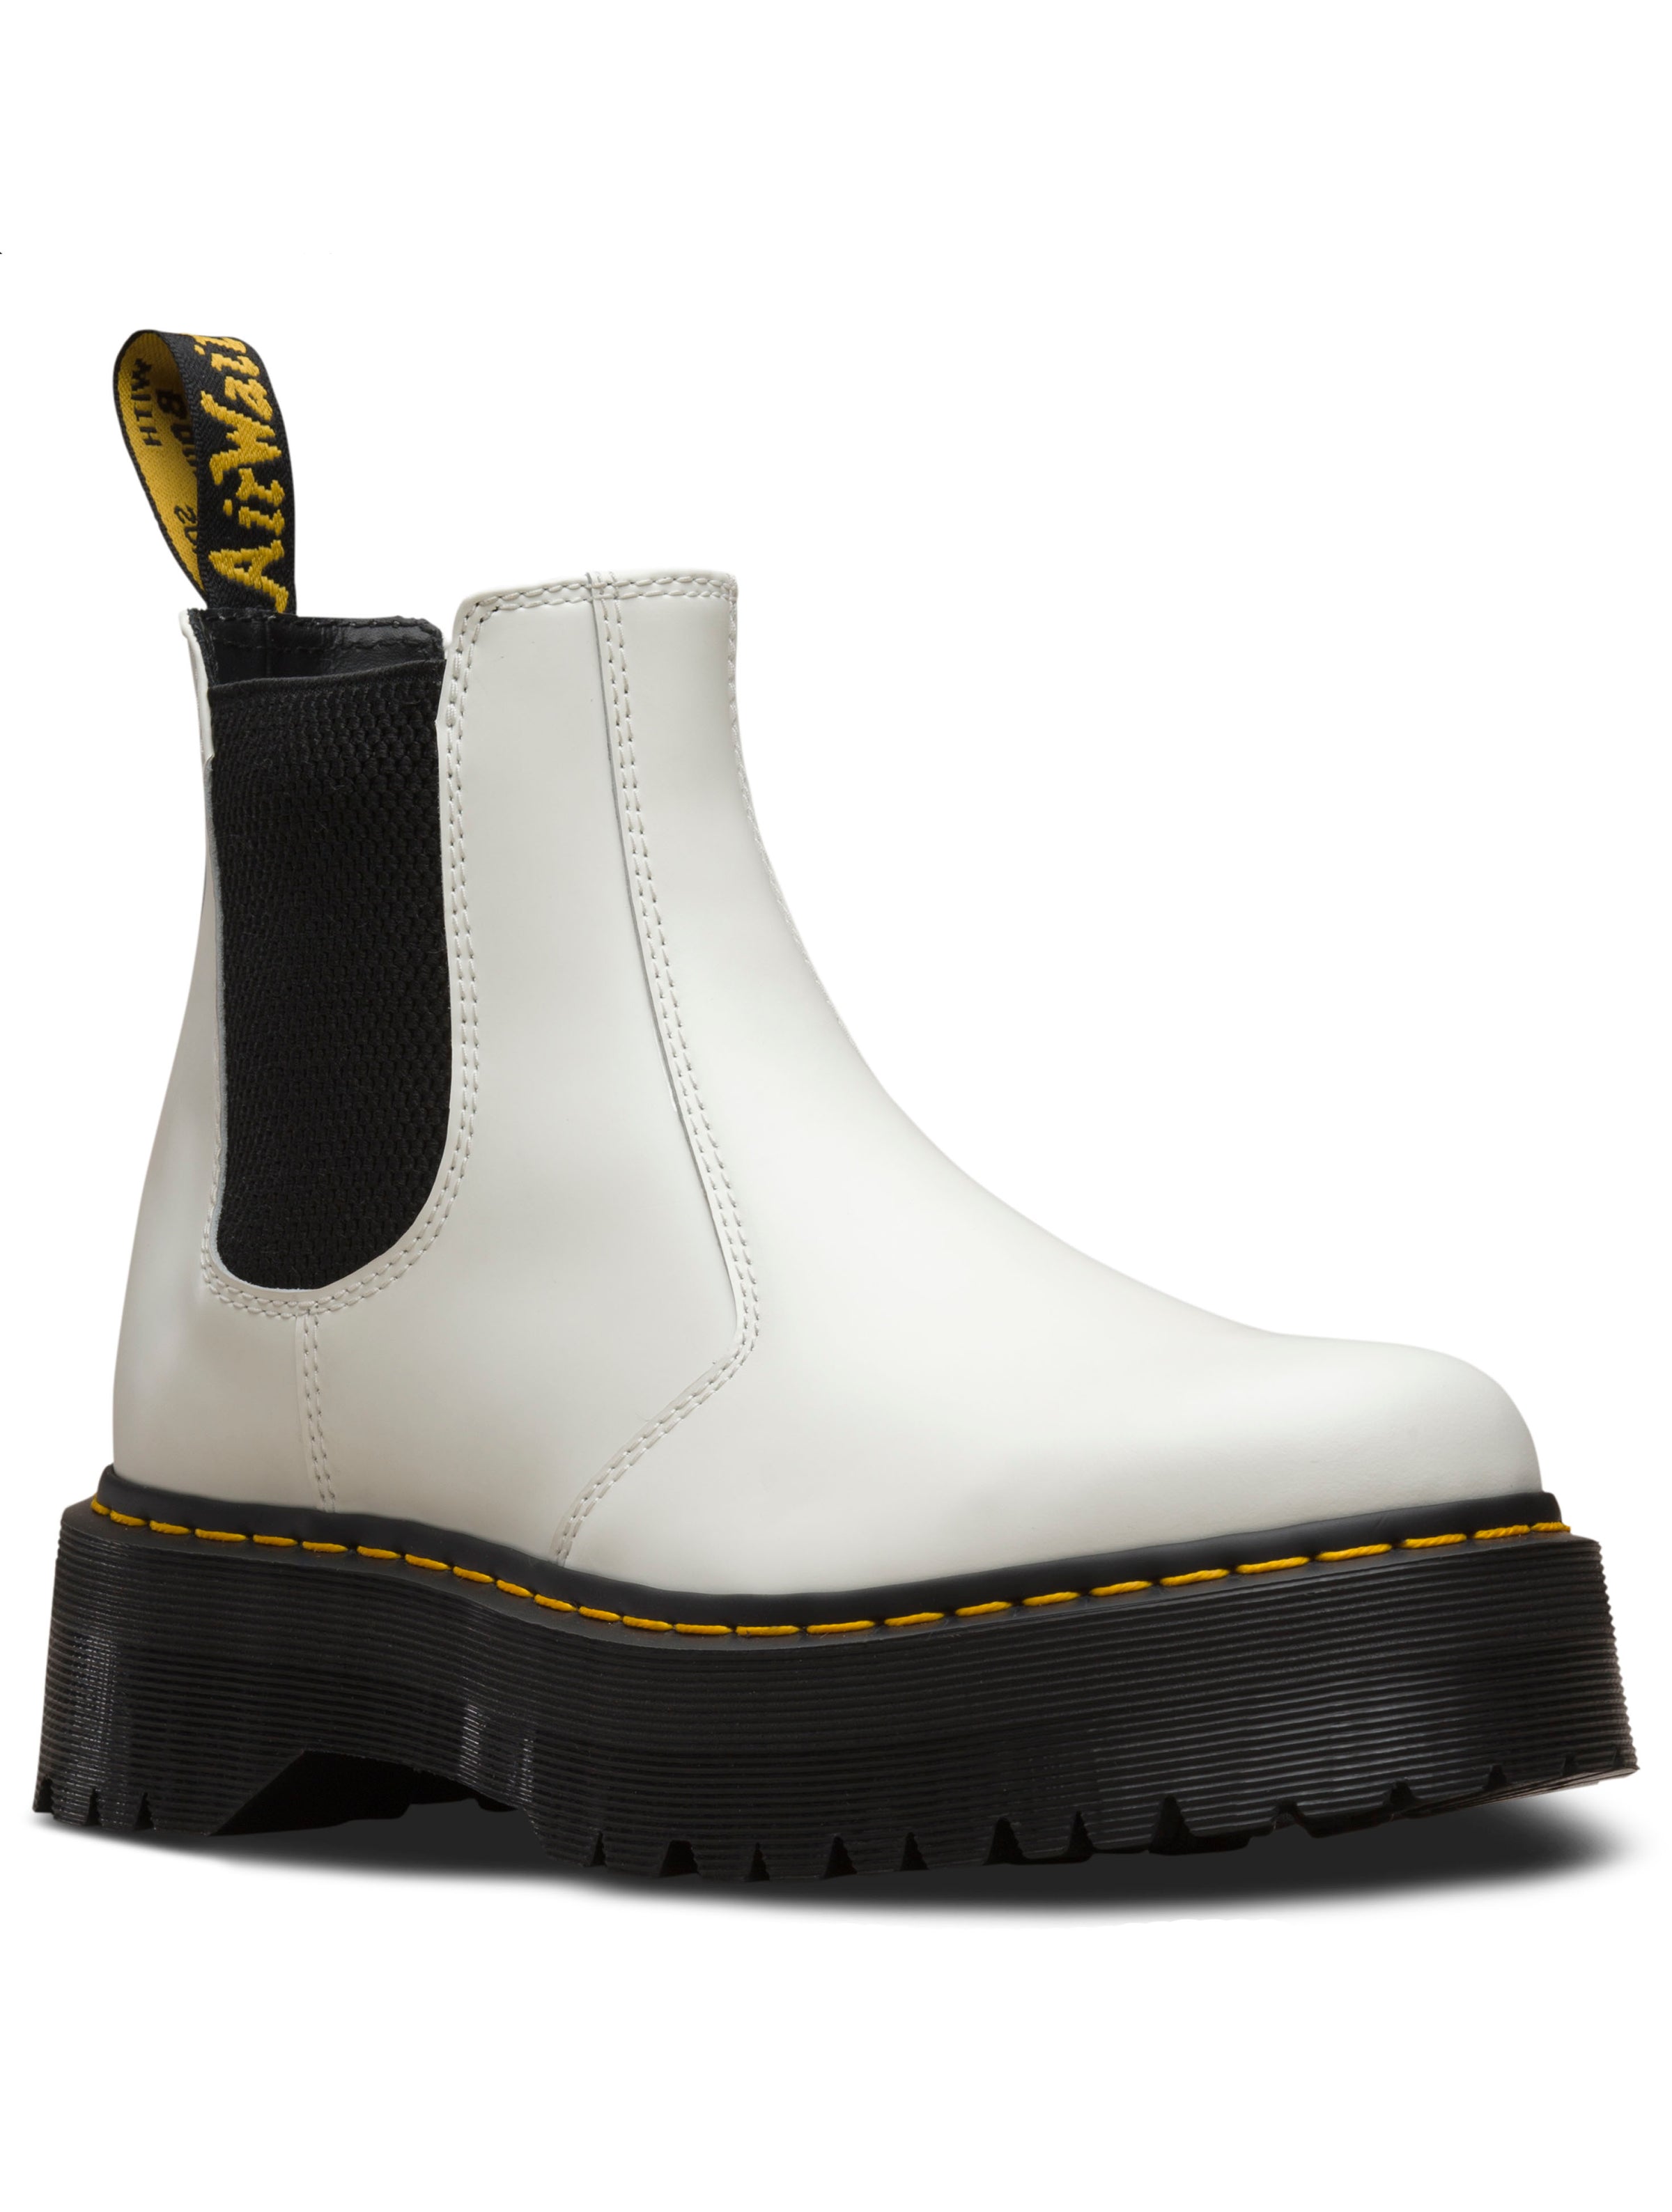 Dr. Martens 2976 Chelsea Quad Boot in White (Final Sale)